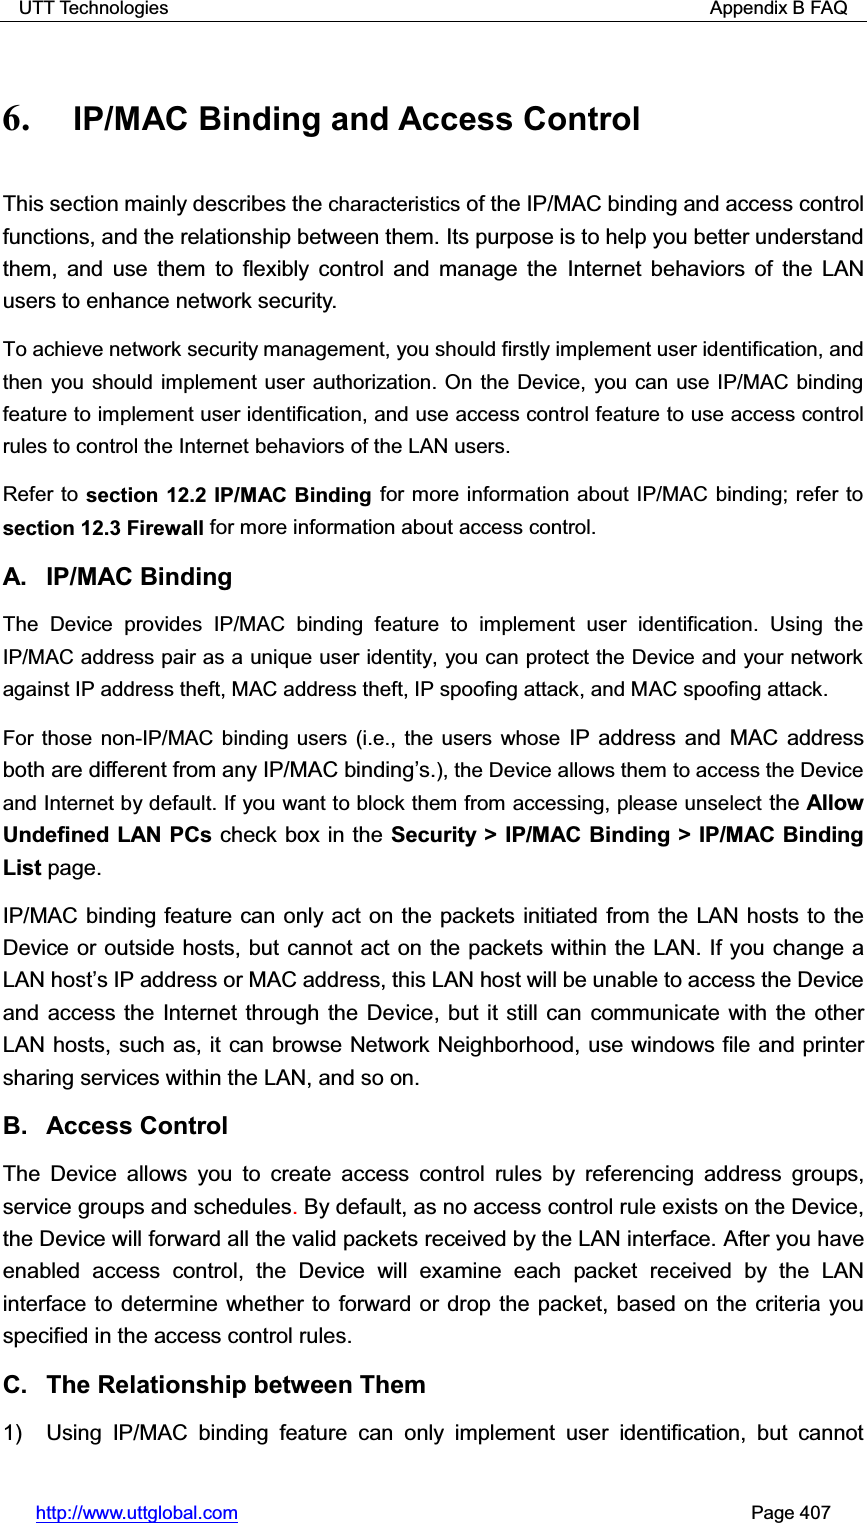 UTT Technologies                                                          Appendix B FAQ http://www.uttglobal.com                                                       Page 407 6. IP/MAC Binding and Access Control   This section mainly describes the characteristics of the IP/MAC binding and access control functions, and the relationship between them. Its purpose is to help you better understand them, and use them to flexibly control and manage the Internet behaviors of the LAN users to enhance network security.   To achieve network security management, you should firstly implement user identification, and then you should implement user authorization. On the Device, you can use IP/MAC binding feature to implement user identification, and use access control feature to use access control rules to control the Internet behaviors of the LAN users.   Refer to section 12.2 IP/MAC Binding for more information about IP/MAC binding; refer to section 12.3 Firewall for more information about access control. A. IP/MAC Binding The Device provides IP/MAC binding feature to implement user identification. Using the IP/MAC address pair as a unique user identity, you can protect the Device and your network against IP address theft, MAC address theft, IP spoofing attack, and MAC spoofing attack.   For those non-IP/MAC binding users (i.e., the users whose IP address and MAC address both are different from any IP/MAC binding¶s.), the Device allows them to access the Device and Internet by default. If you want to block them from accessing, please unselect the Allow Undefined LAN PCs check box in the Security &gt; IP/MAC Binding &gt; IP/MAC Binding List page.IP/MAC binding feature can only act on the packets initiated from the LAN hosts to the Device or outside hosts, but cannot act on the packets within the LAN. If you change a LAN host¶s IP address or MAC address, this LAN host will be unable to access the Device and access the Internet through the Device, but it still can communicate with the other LAN hosts, such as, it can browse Network Neighborhood, use windows file and printer sharing services within the LAN, and so on. B. Access Control  The Device allows you to create access control rules by referencing address groups, service groups and schedules.By default, as no access control rule exists on the Device, the Device will forward all the valid packets received by the LAN interface. After you have enabled access control, the Device will examine each packet received by the LAN interface to determine whether to forward or drop the packet, based on the criteria you specified in the access control rules.C.  The Relationship between Them 1)  Using IP/MAC binding feature can only implement user identification, but cannot 